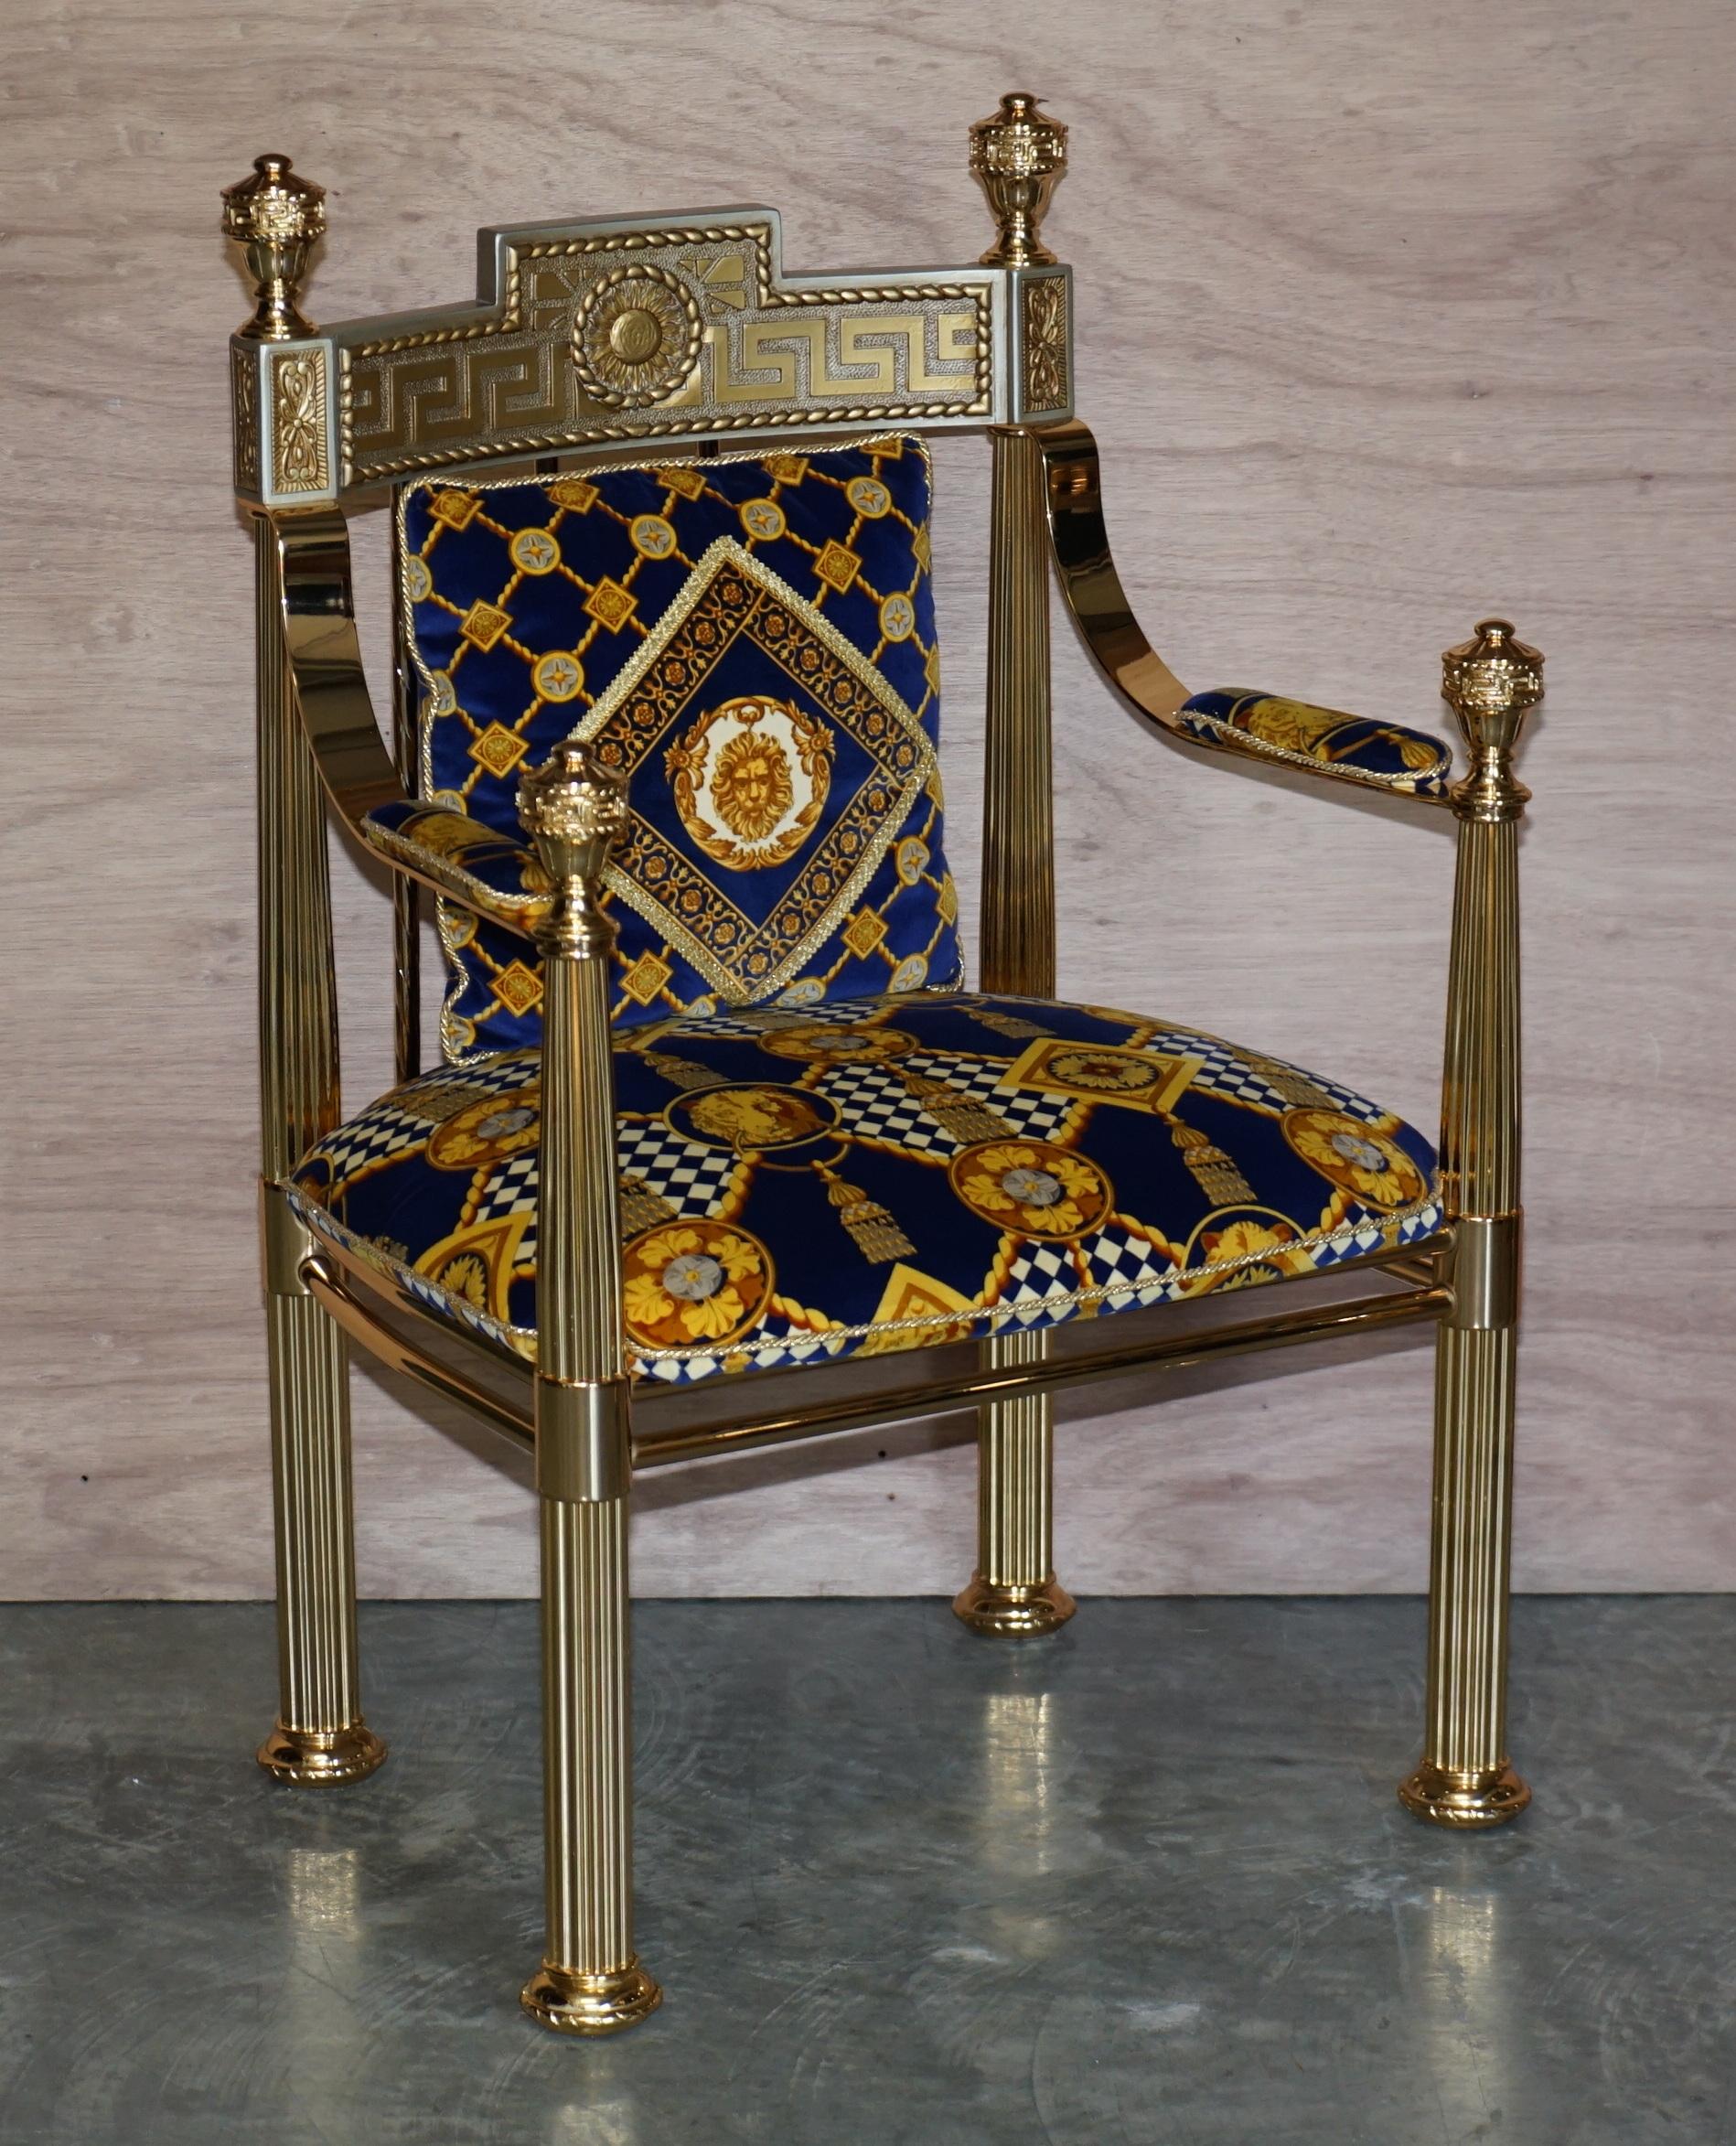 We are delighted to offer his exquisite pair of New Old Stock Gianni Versace Hollywood Regency throne armchairs

These chairs are very rare, new old stock upholstered with deep blue and gold velvet embroidered fabric depicting the Versace Lion’s